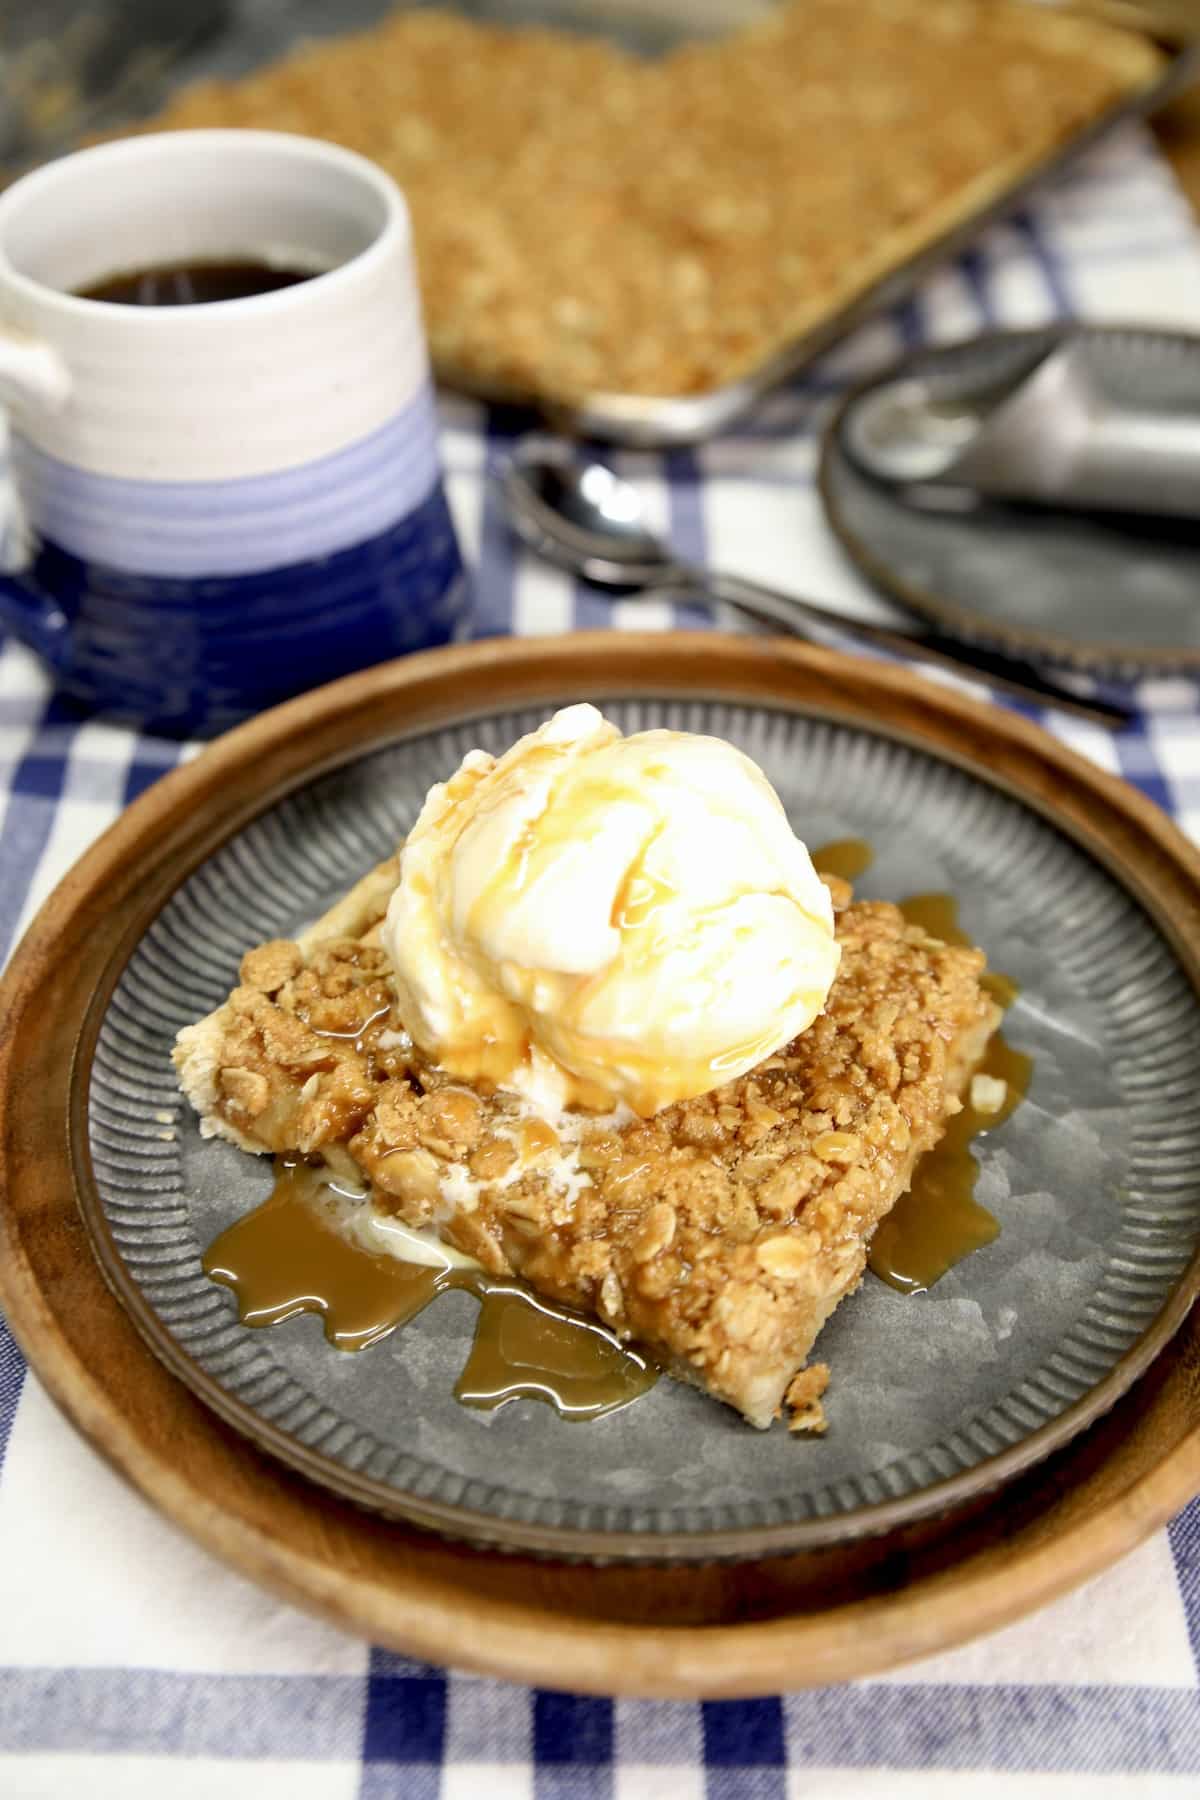 Slice of apple slab pie with ice cream and caramel drizzle, cup of coffee. 